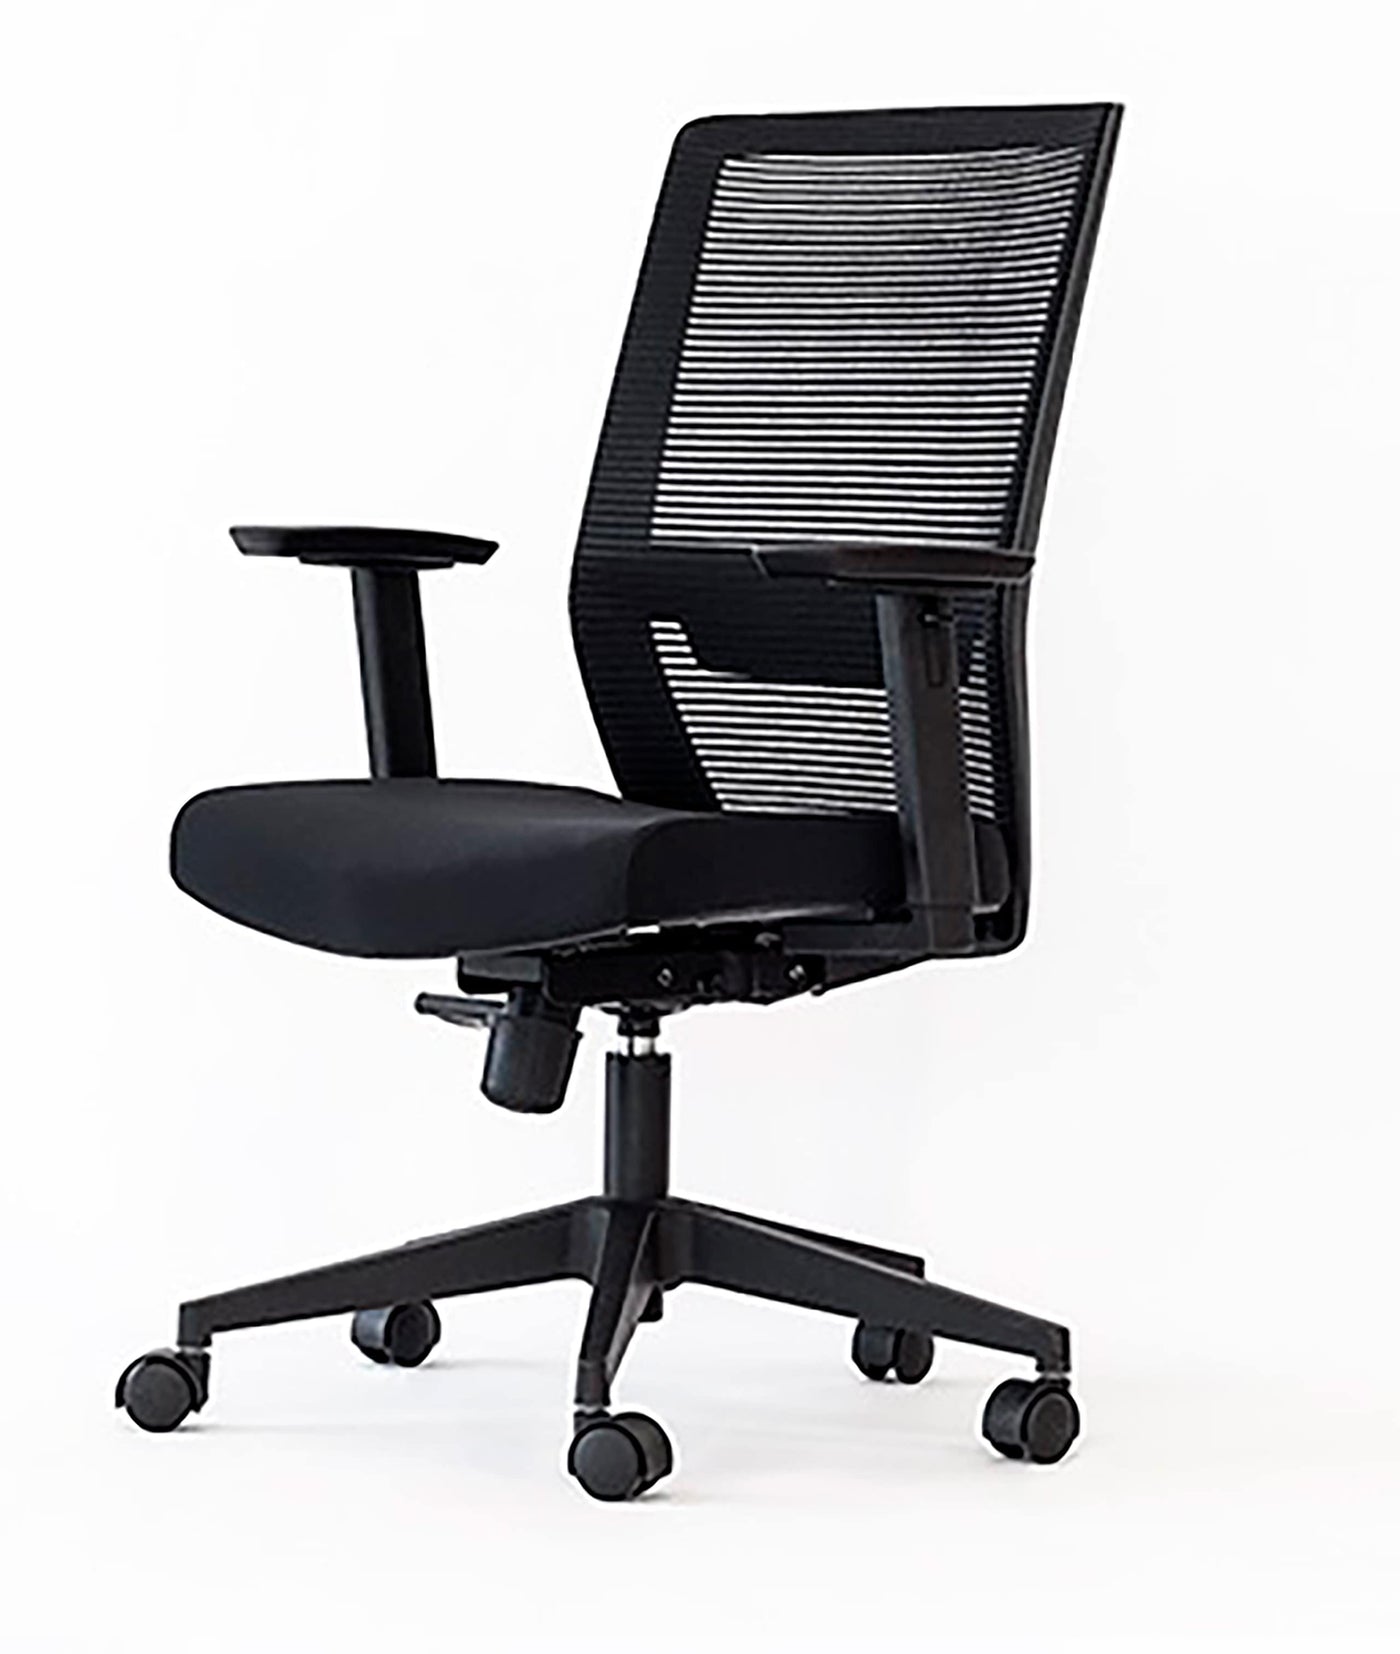 Vektor Office Chair | Home Office Chair | Ergonomic Home Office Chair | Black Ergonomic Office Chair